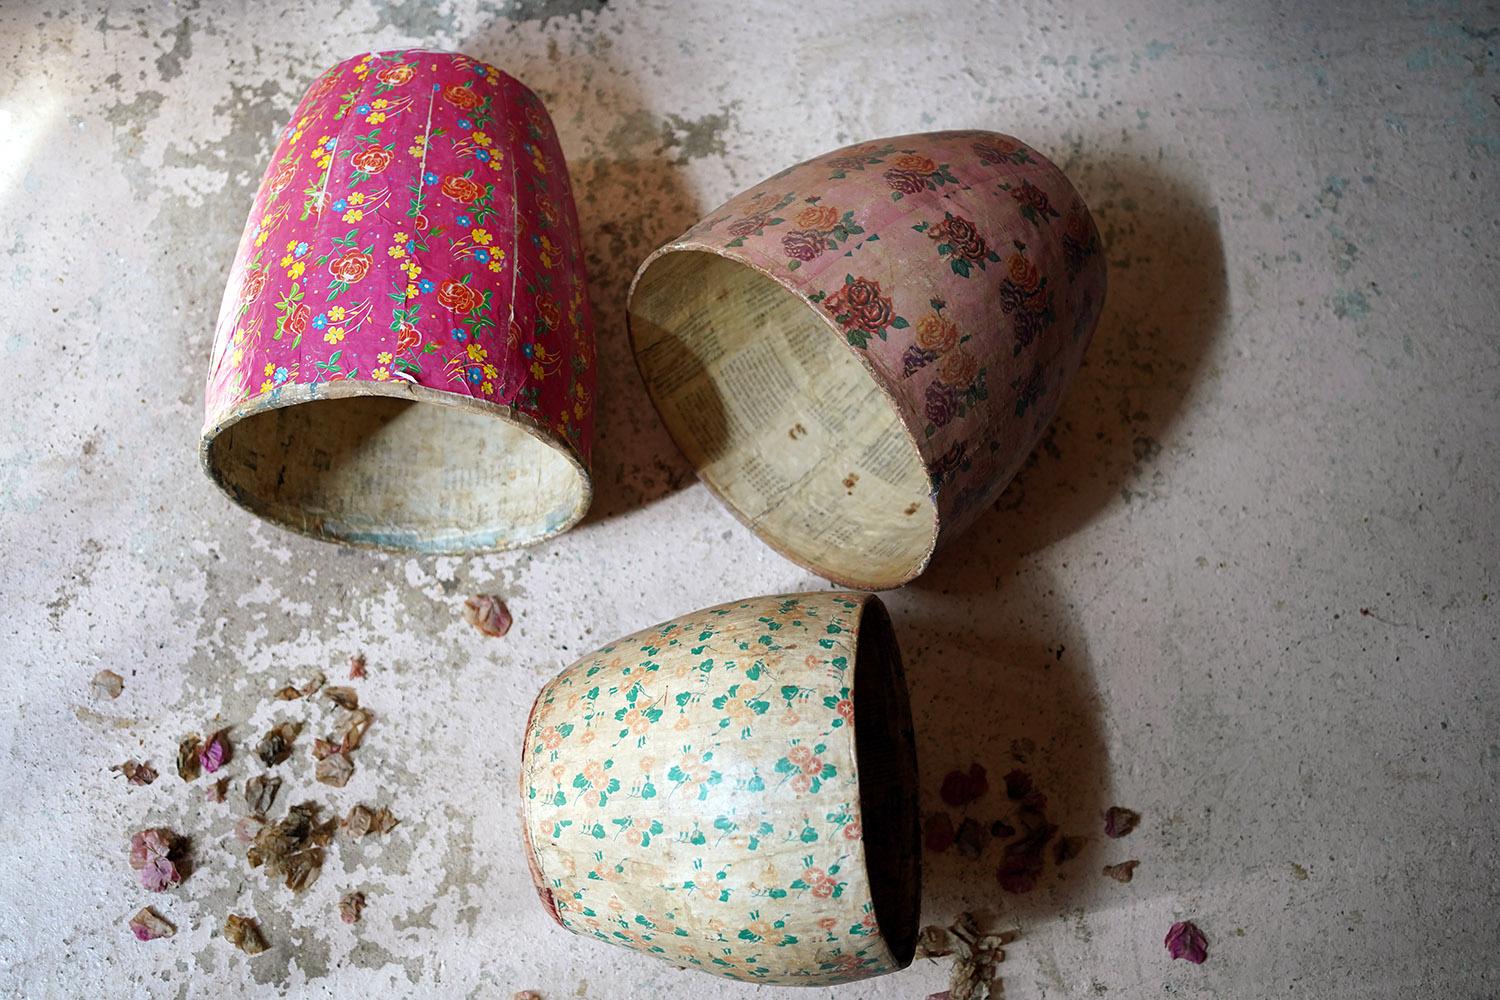 The marvellously colourful trio of papier-mache baskets or pots, having floral rose themed exteriors in differing shades of pink and ivory, the interiors with newspaper cuttings, each surviving from mid-century China.

Remaining in good overall